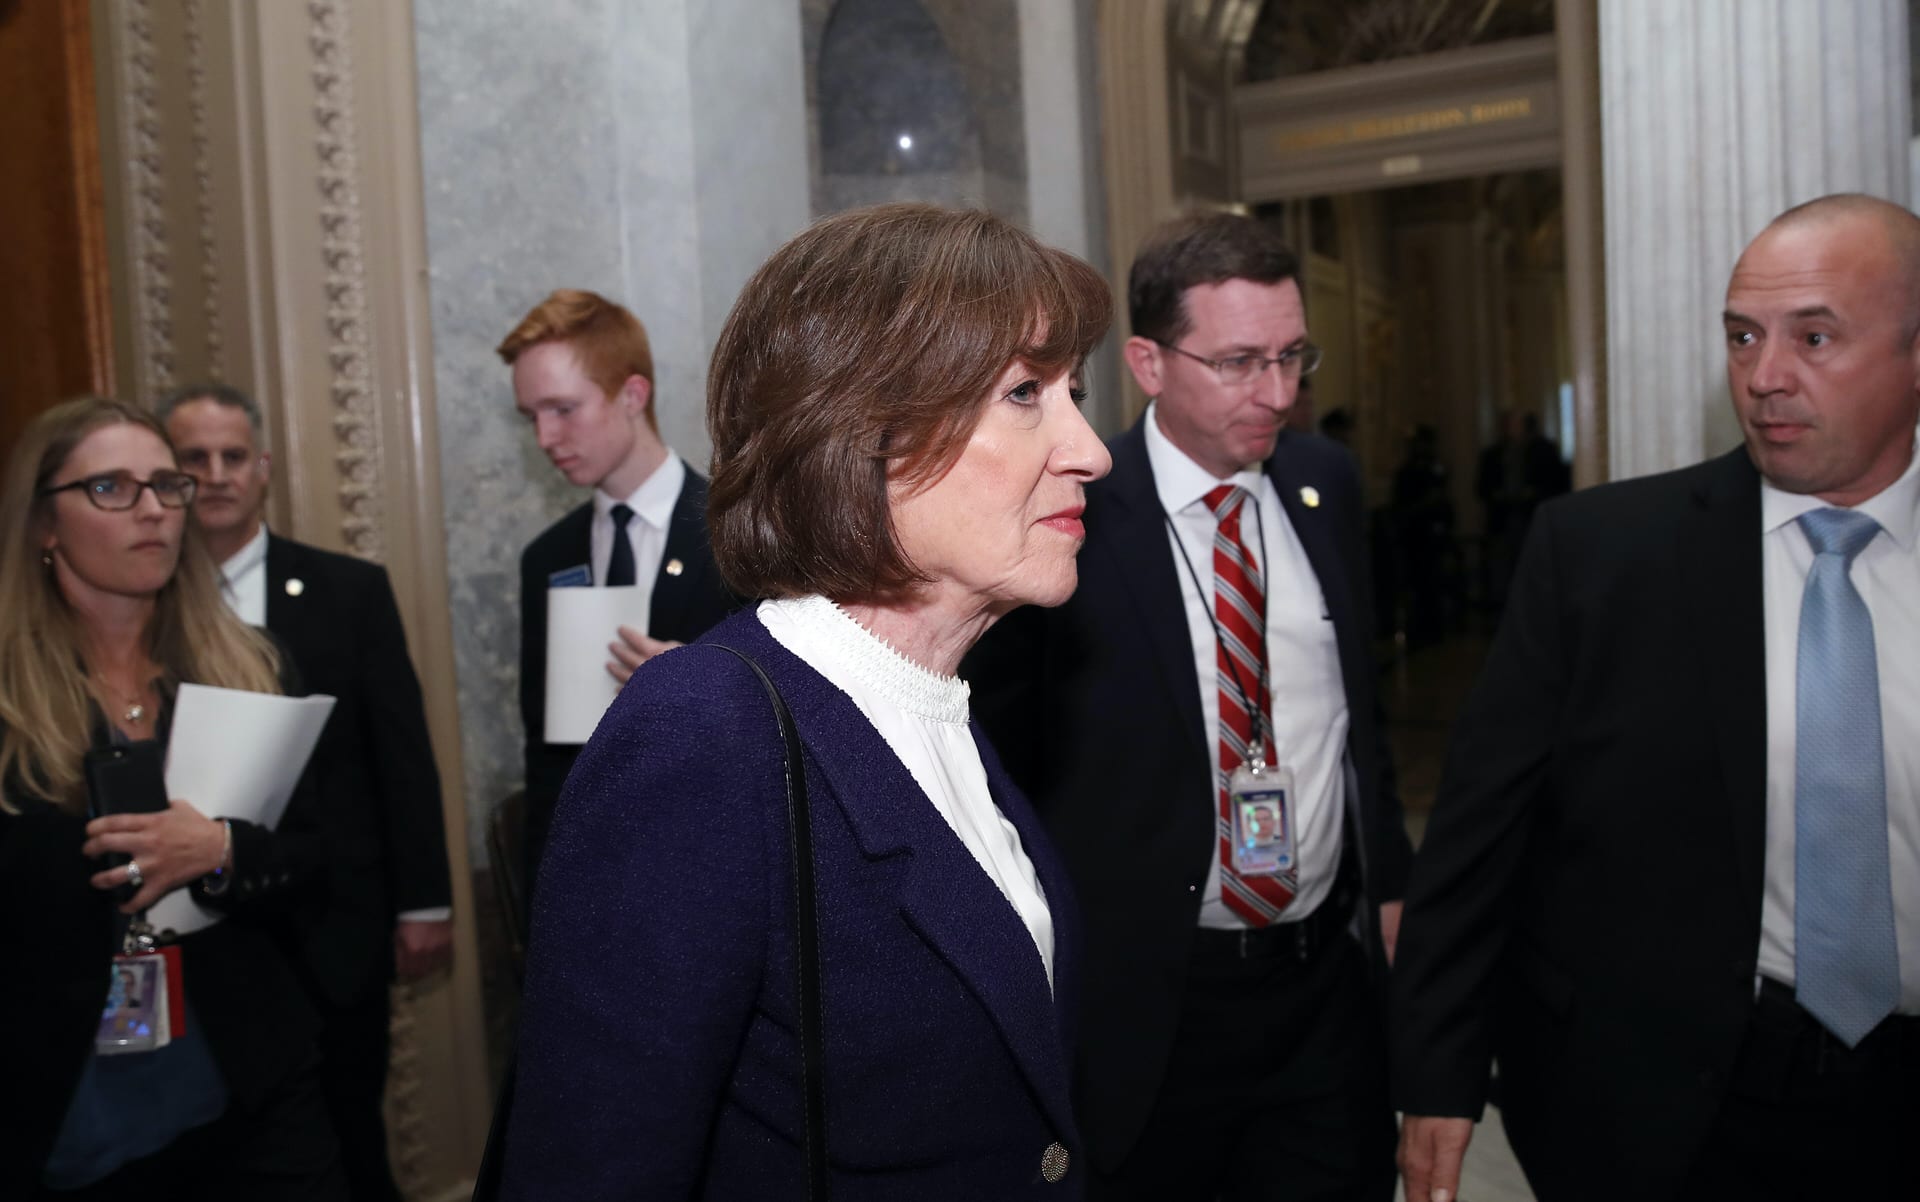 Sen. Susan Collins, R-Maine, departs after the confirmation vote of Supreme Court nominee Brett Kavanaugh, on Capitol Hill, Saturday, Oct. 6, 2018 in Washington. Kavanaugh was confirmed 50-48.